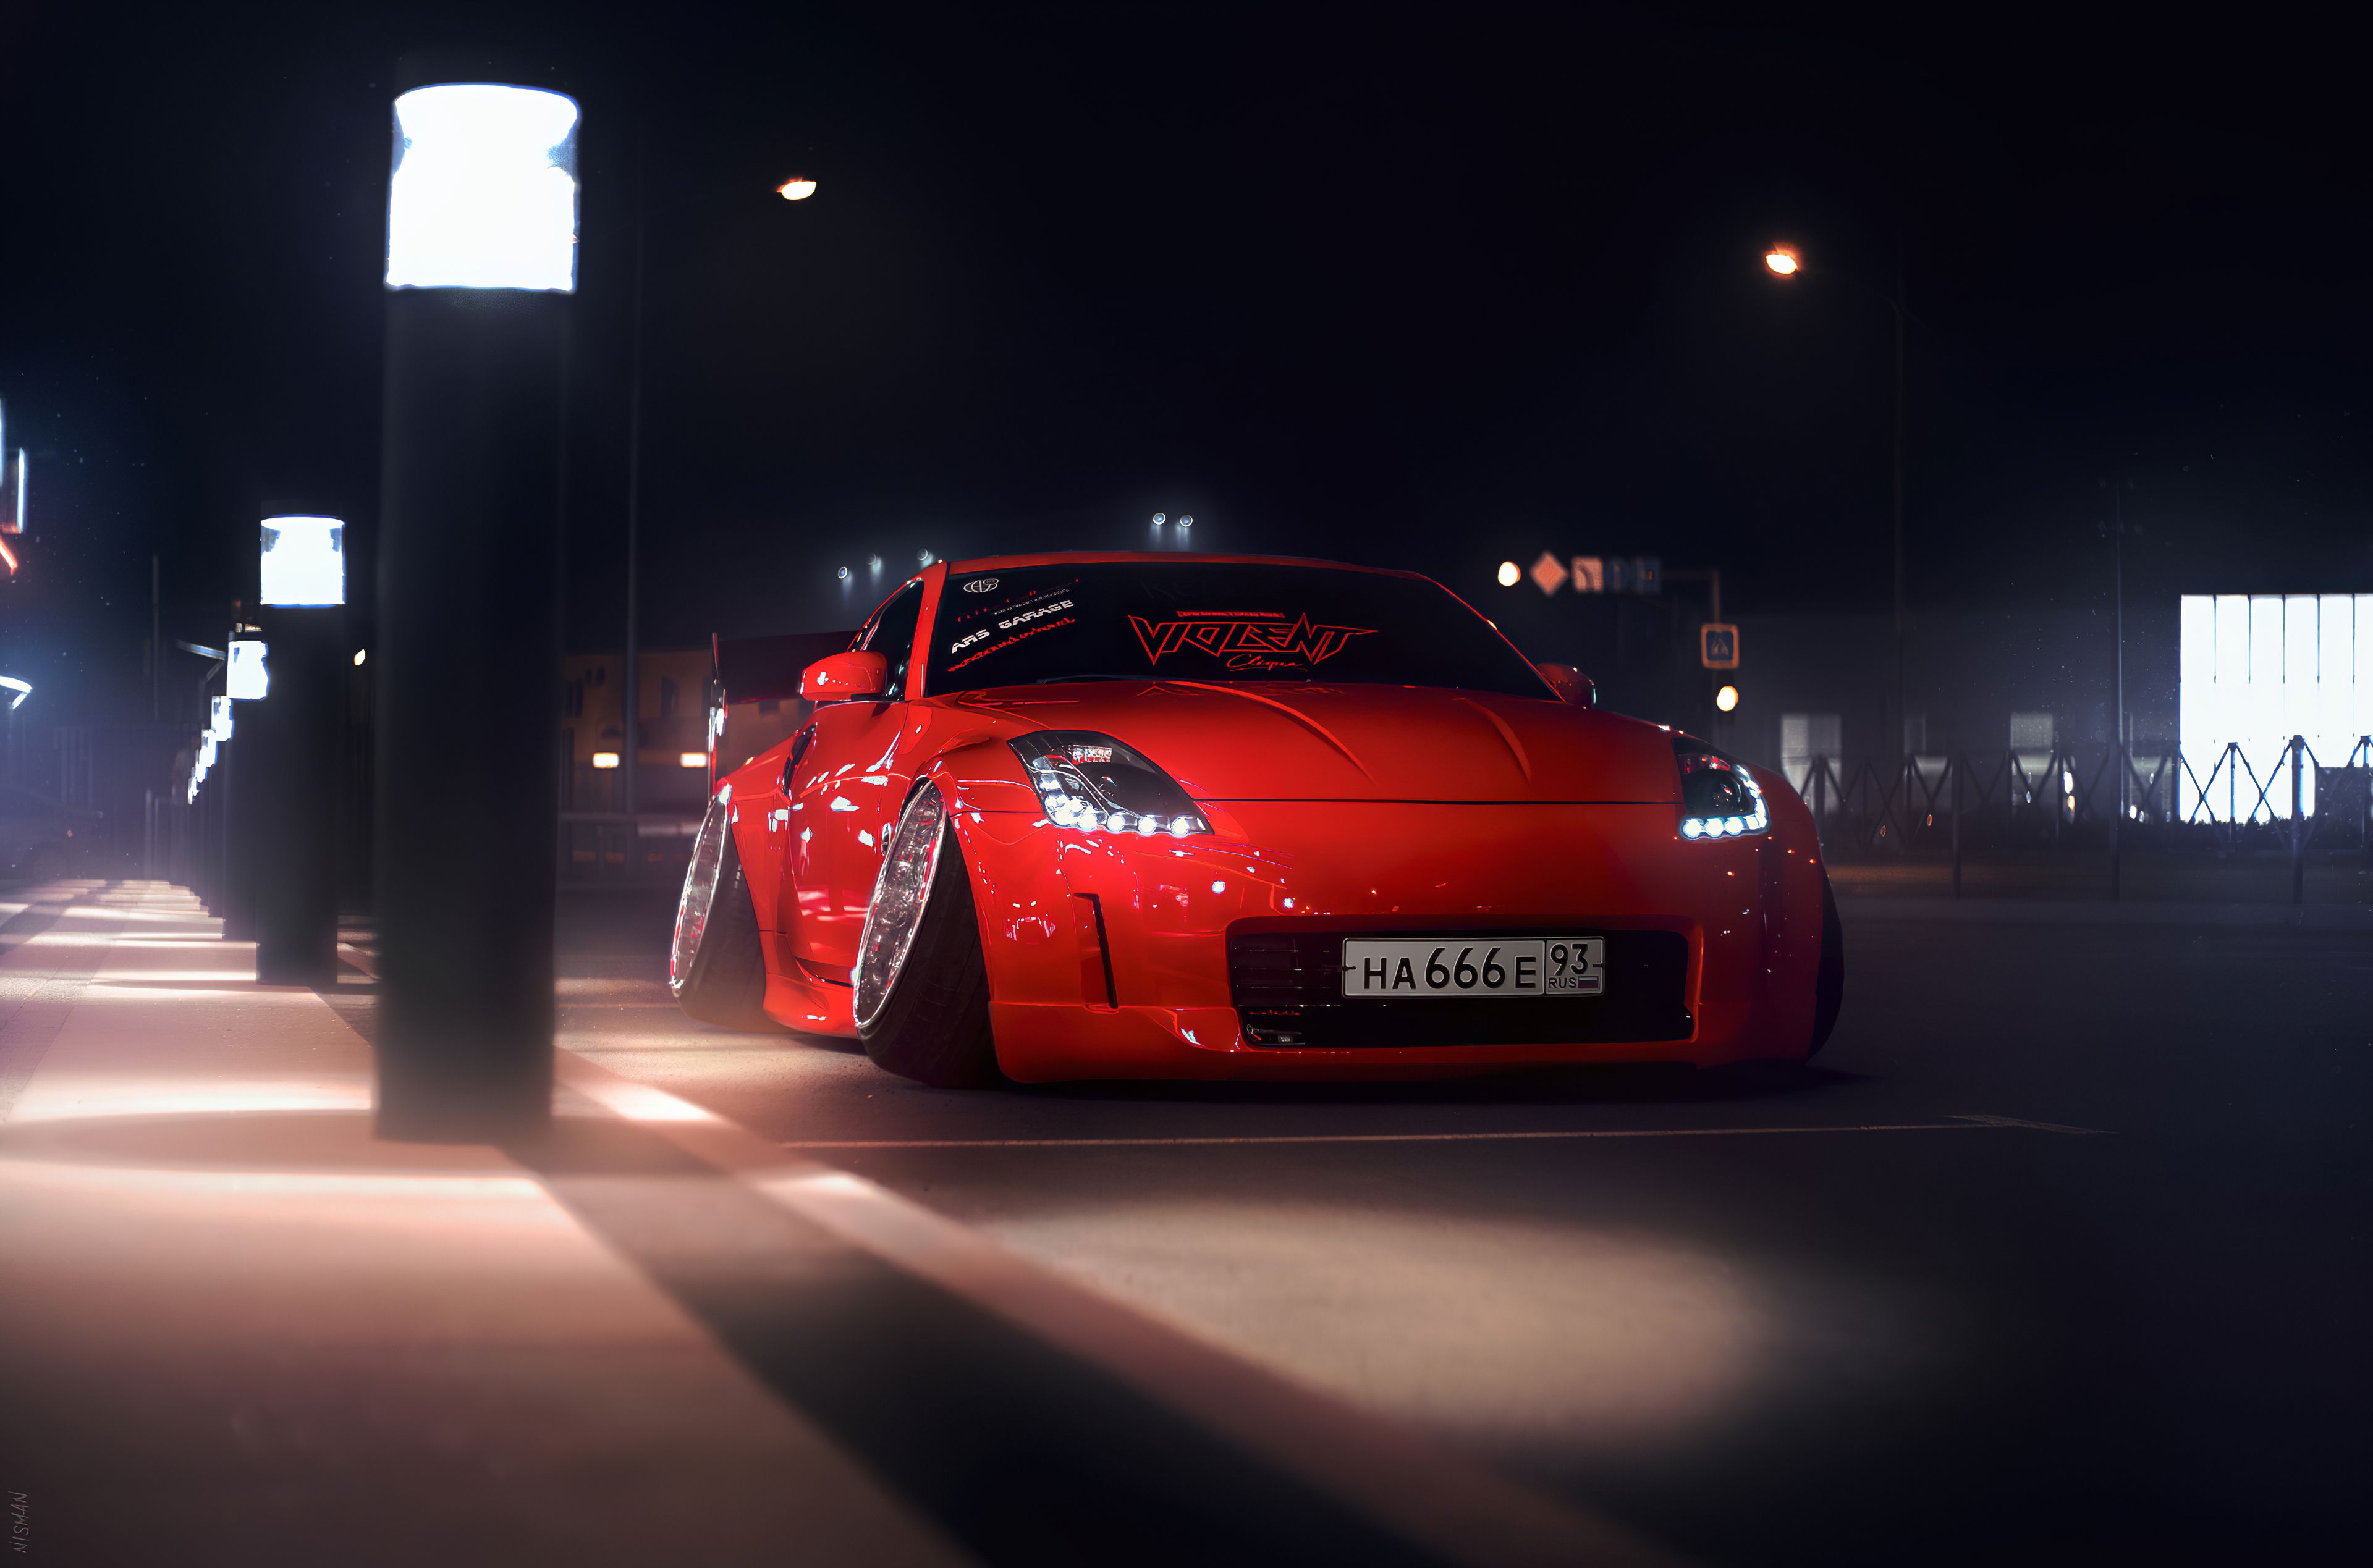 Nissan 350Z Iphone Wallpapers